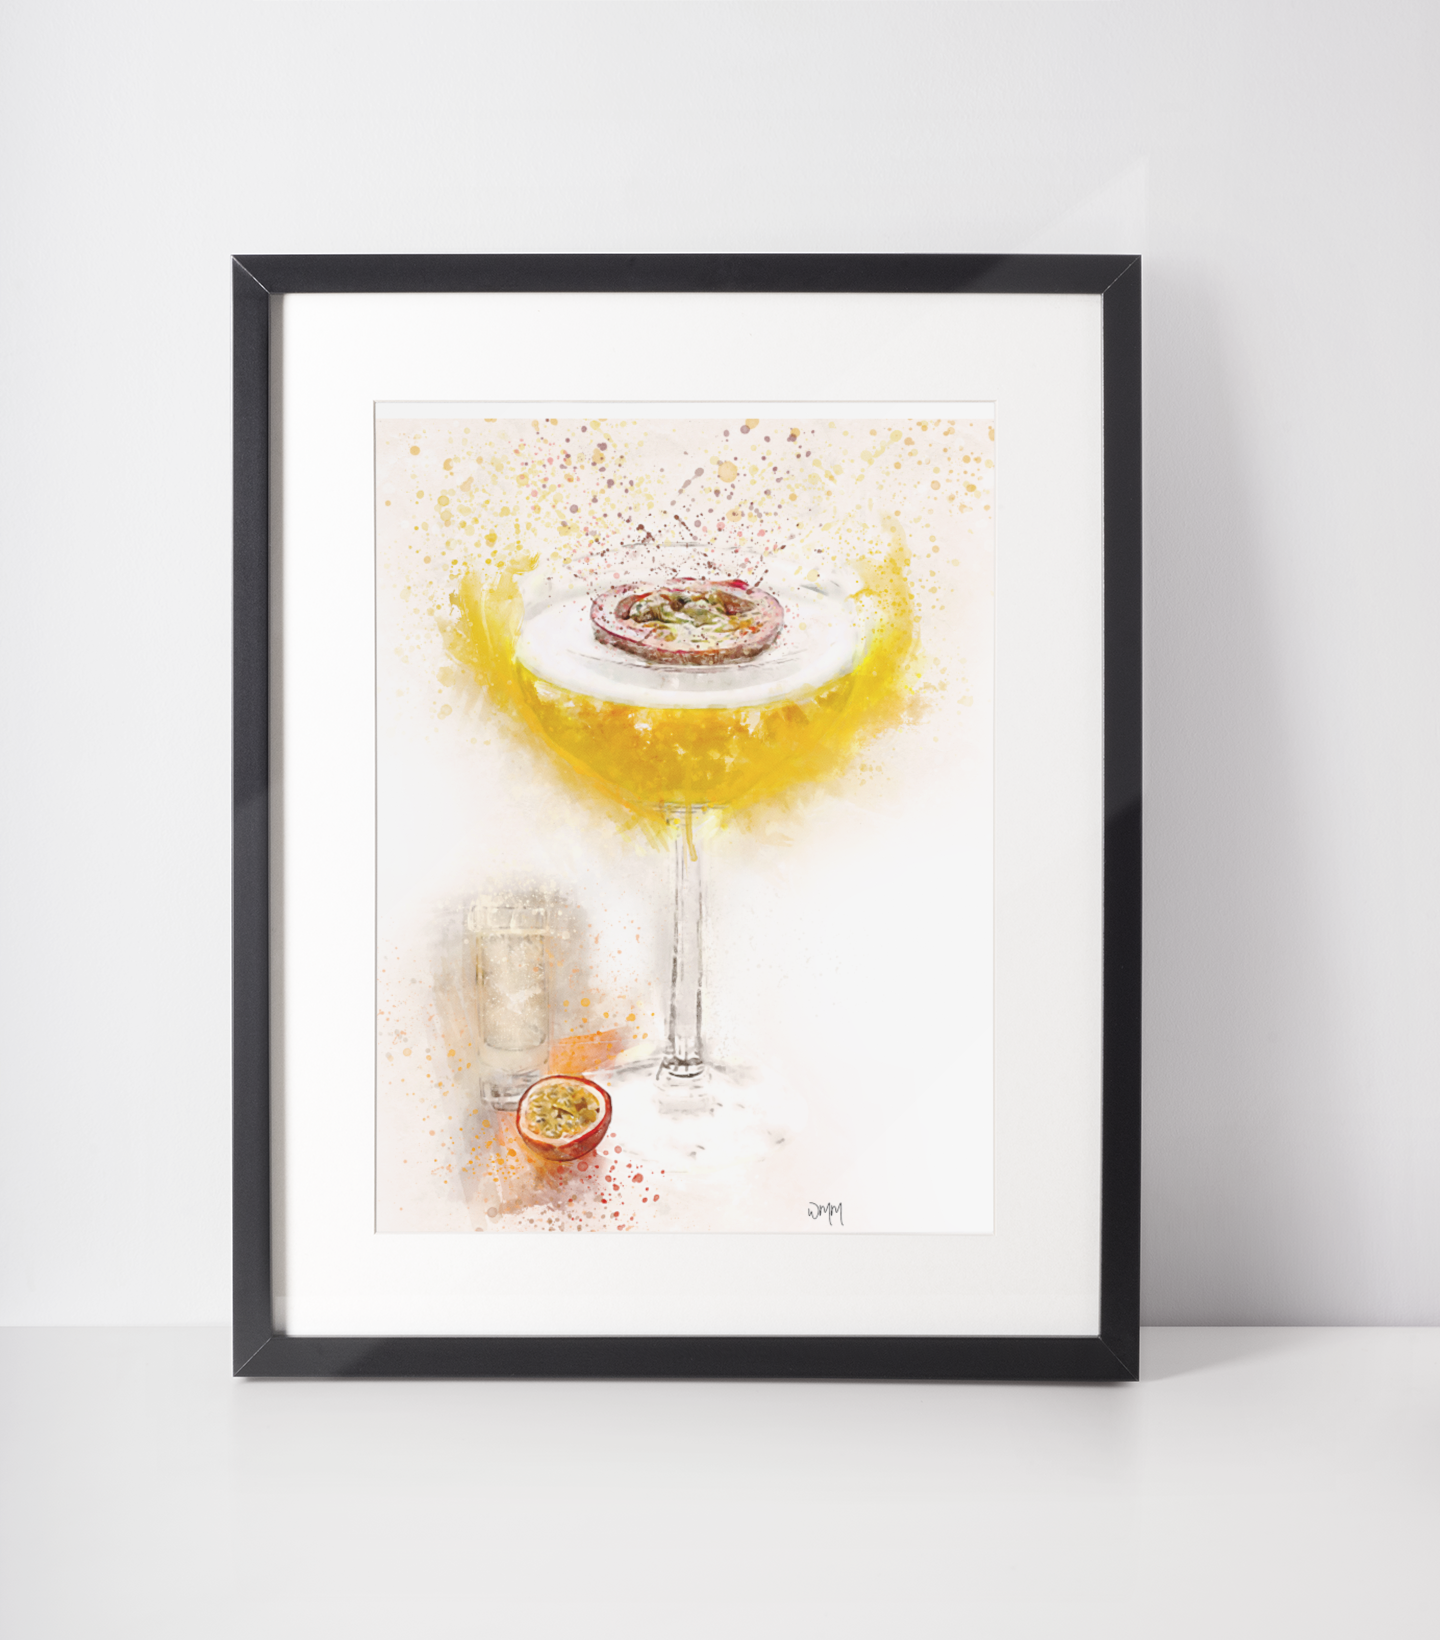 Pornstar Martini Cocktail Wall Art Print - available in different sizes